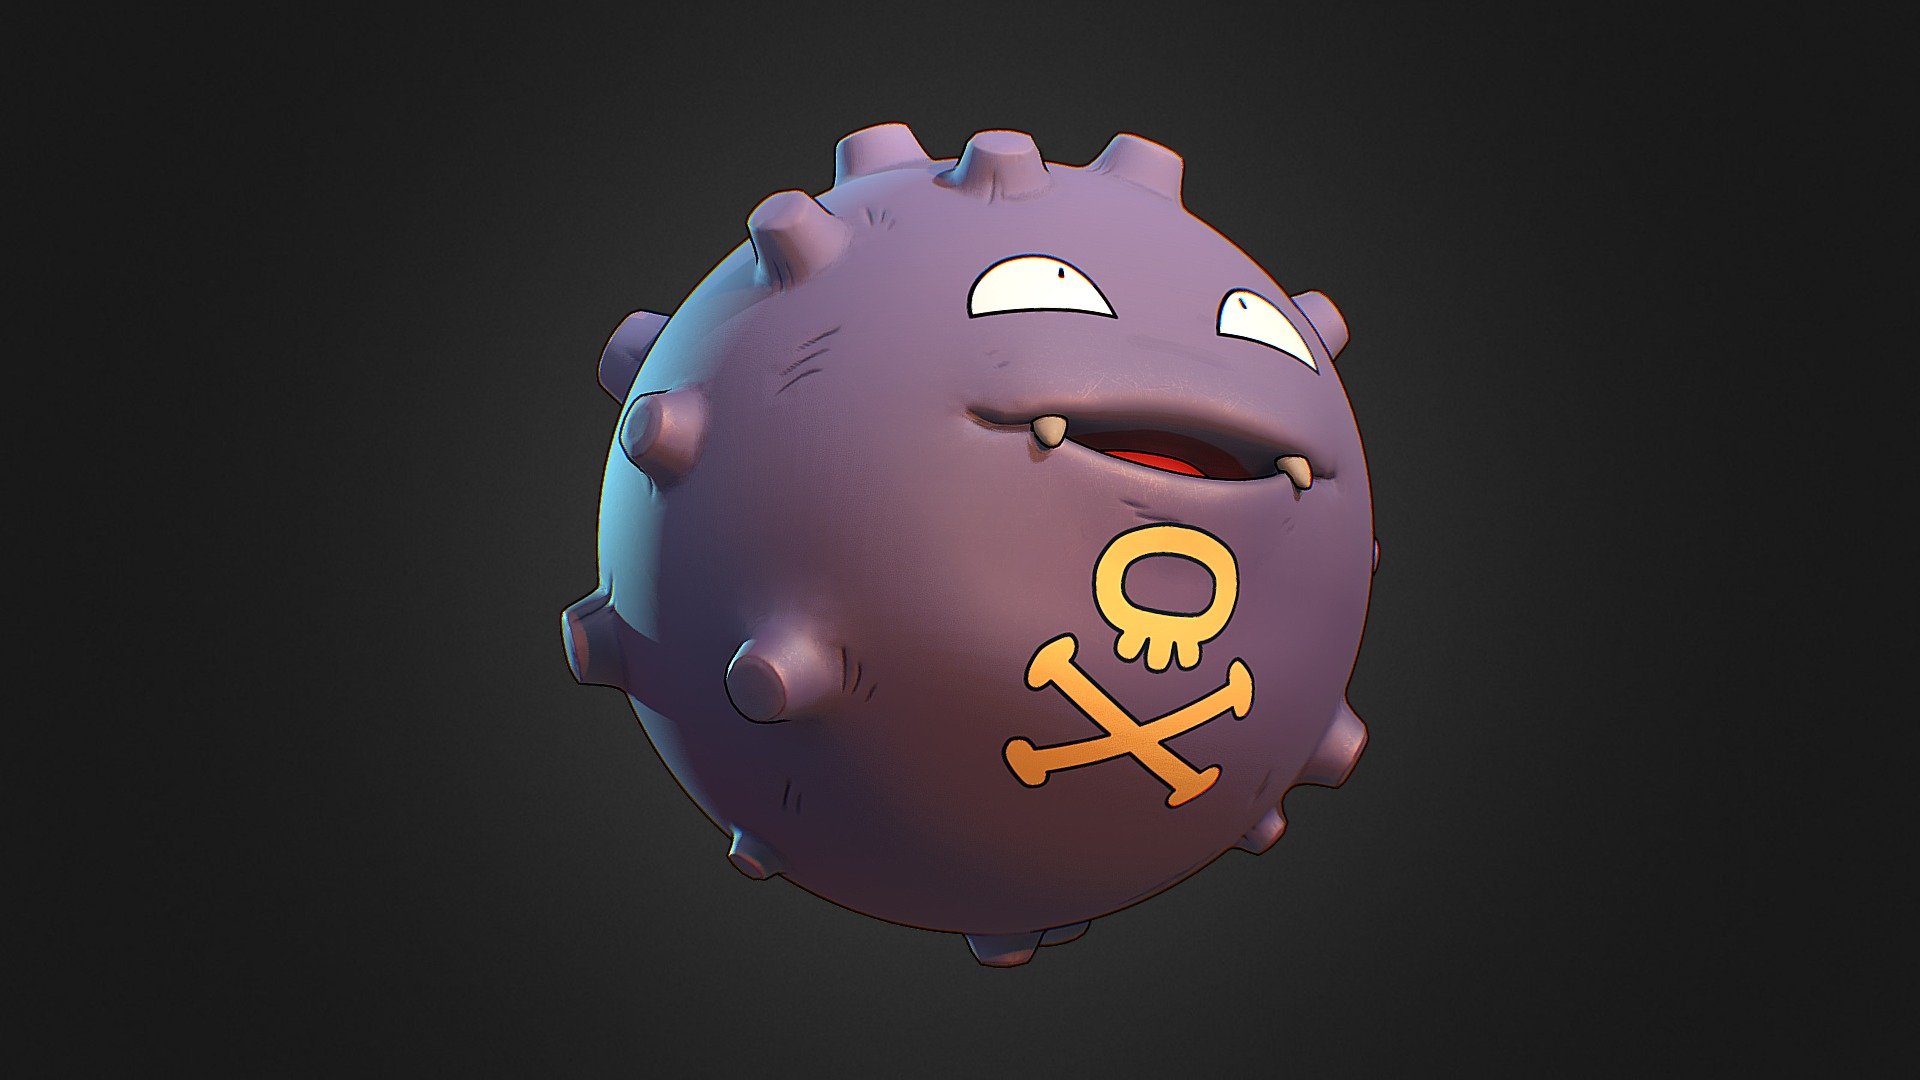 The gassy one - Koffing Pokemon - 3D model by 3dlogicus 3d model